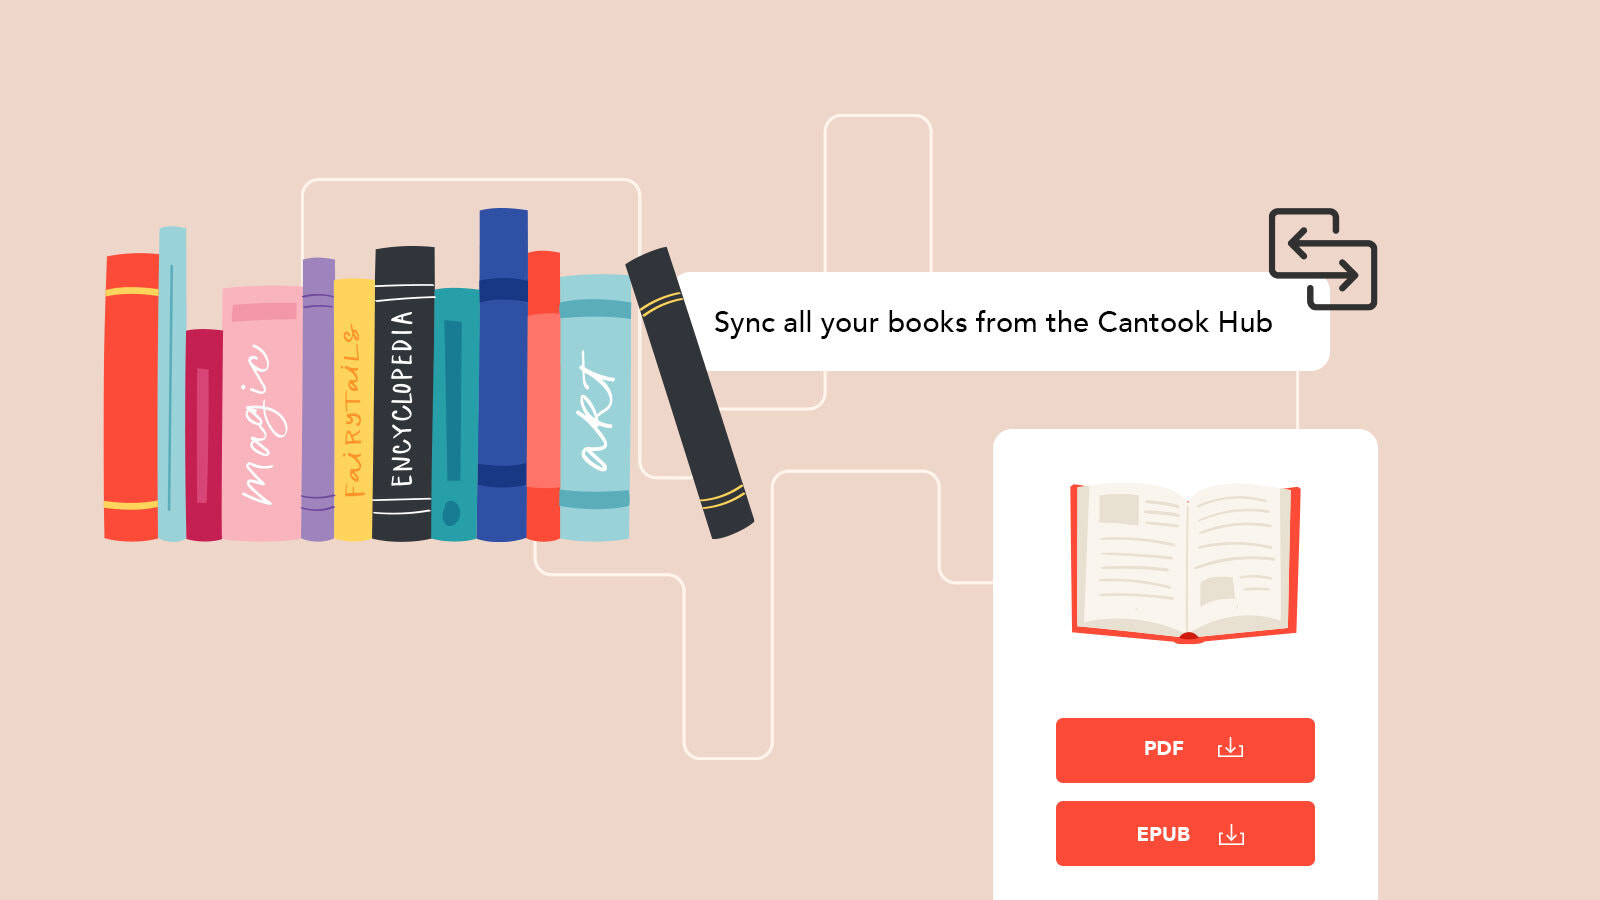 Sync your books from the Cantook Hub